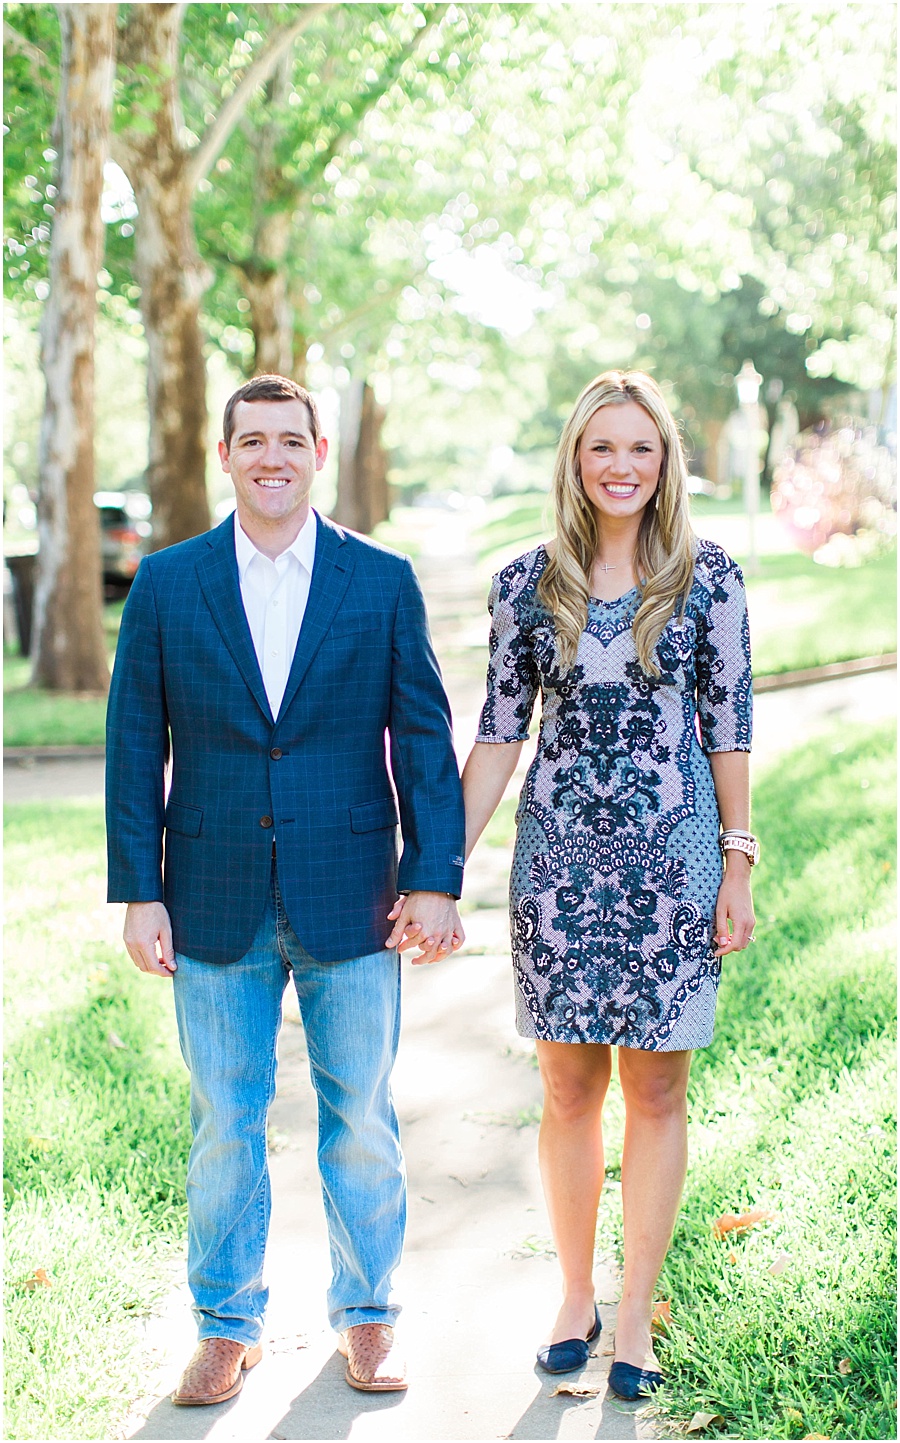  Zach + Kelcey Engagements 